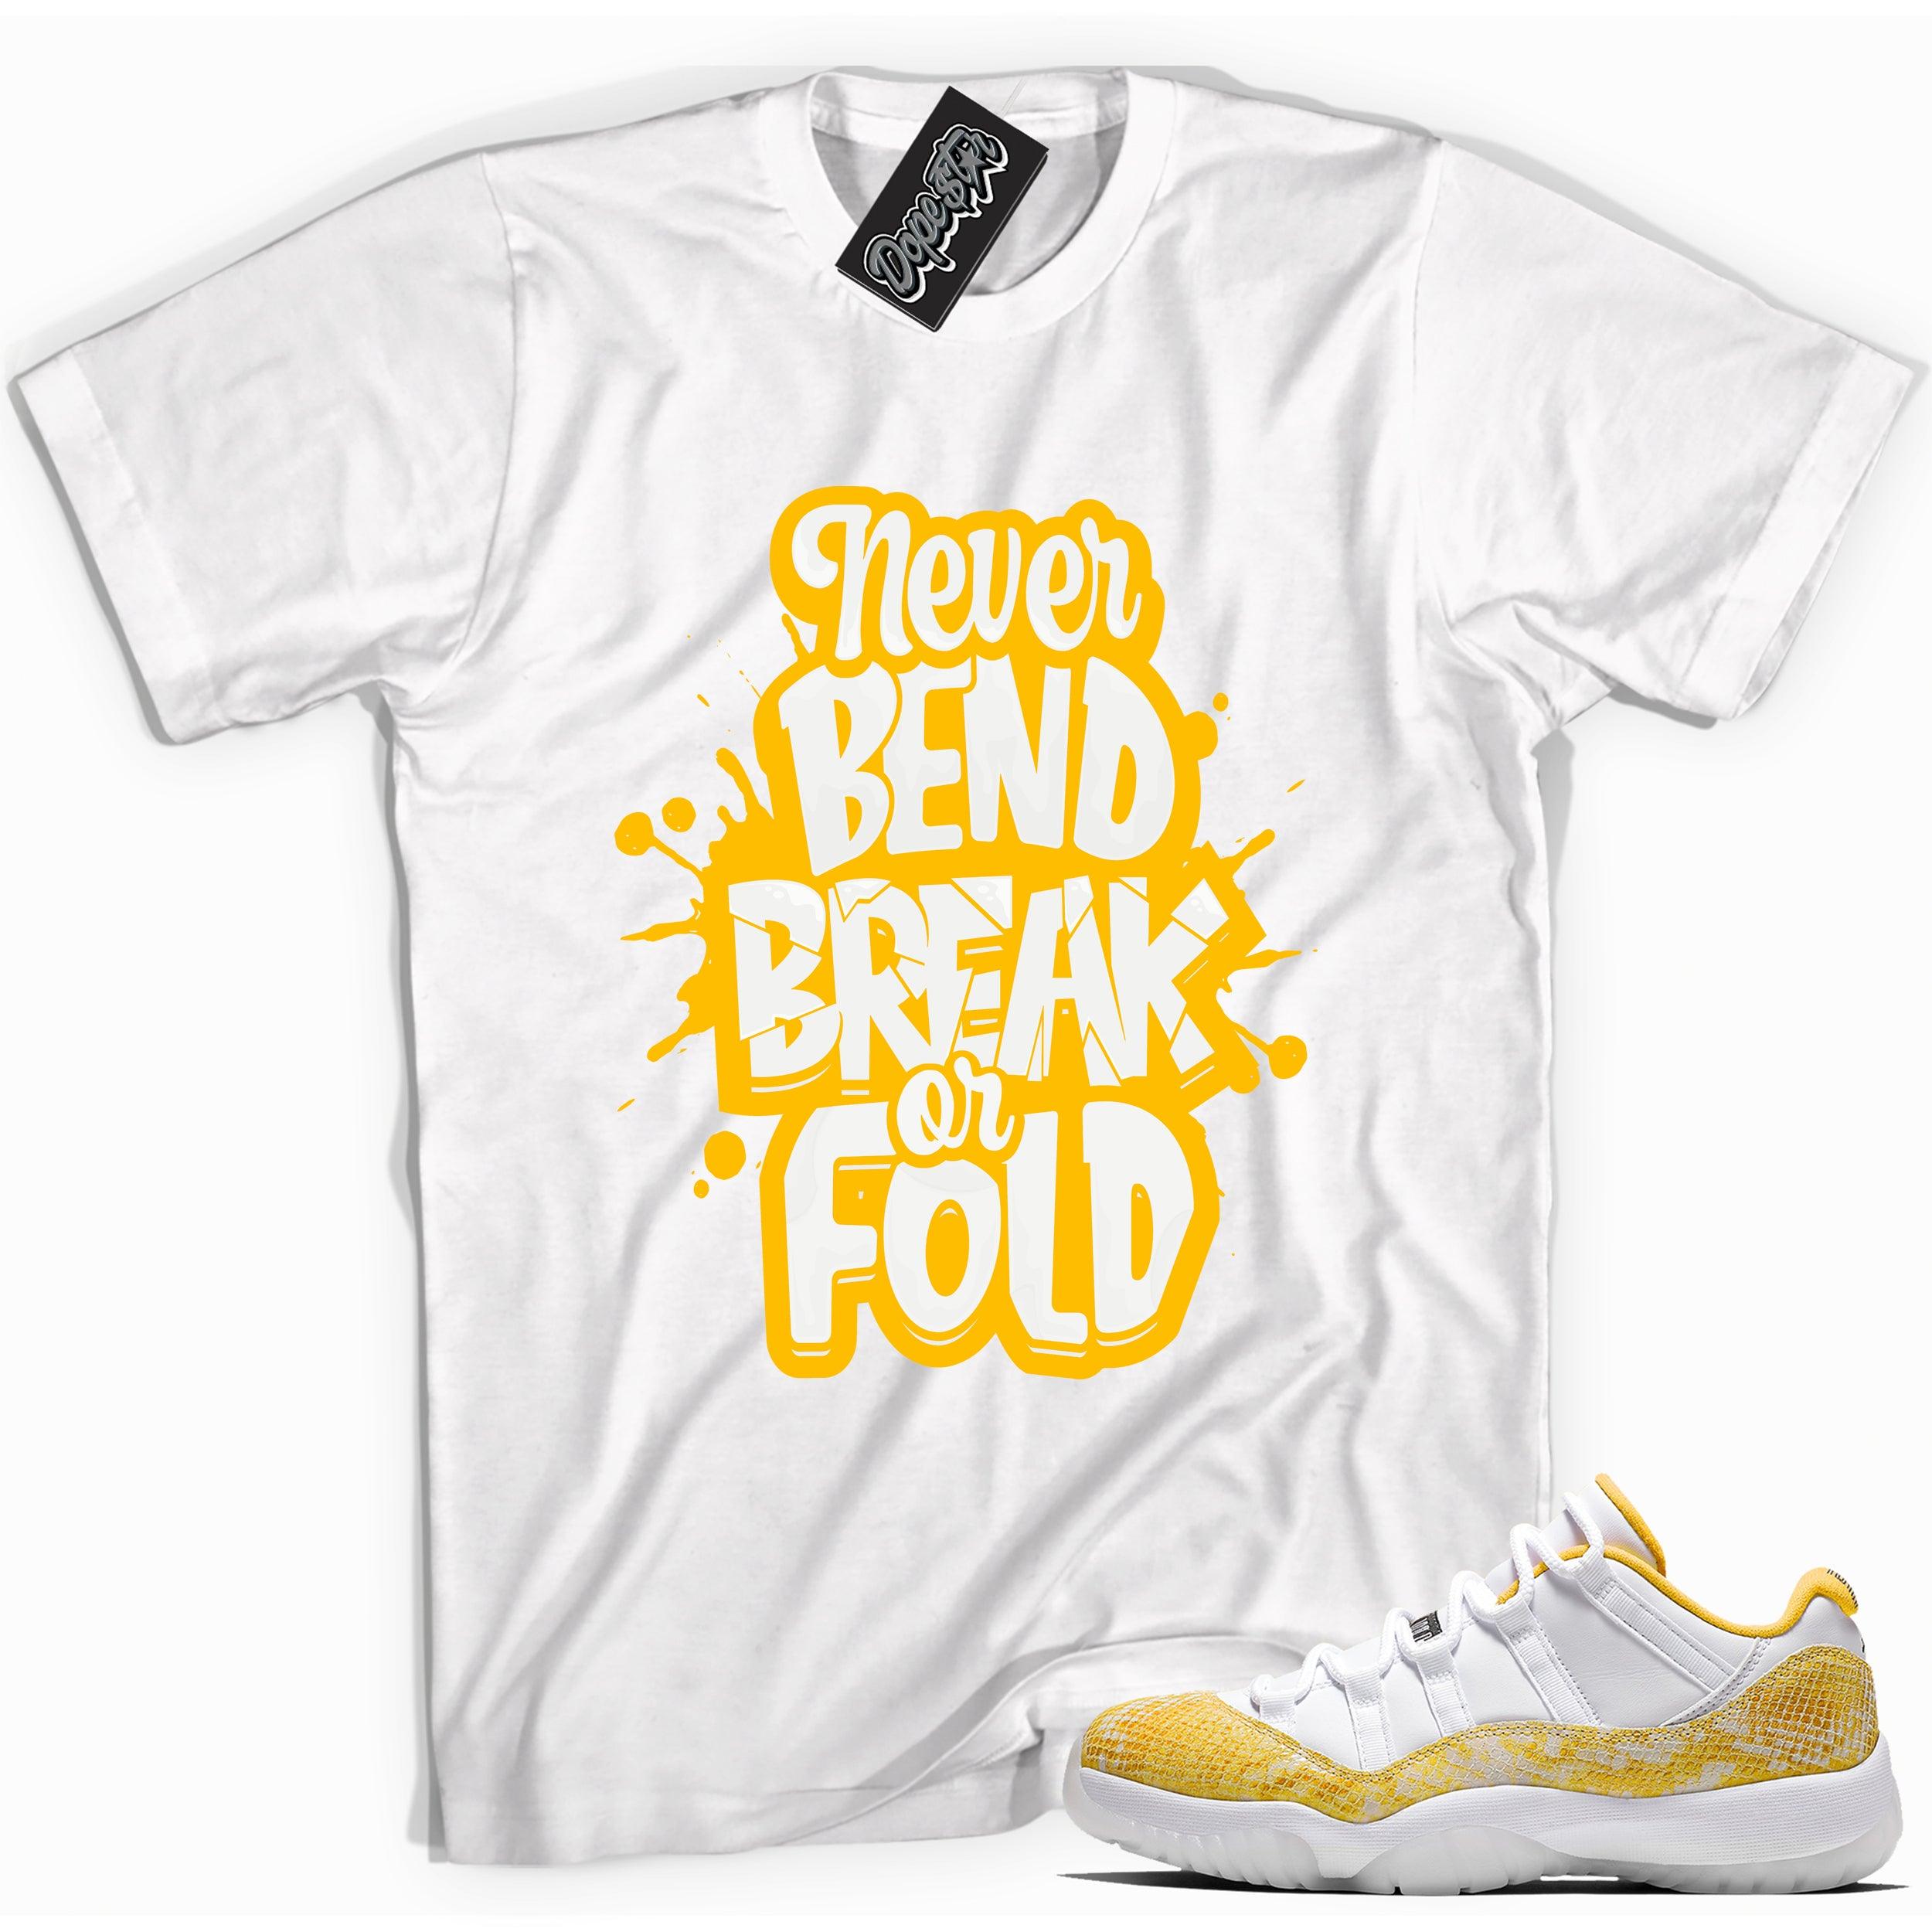 Cool white graphic tee with 'never bend break or fold' print, that perfectly matches Air Jordan 11 Low Yellow Snakeskin sneakers